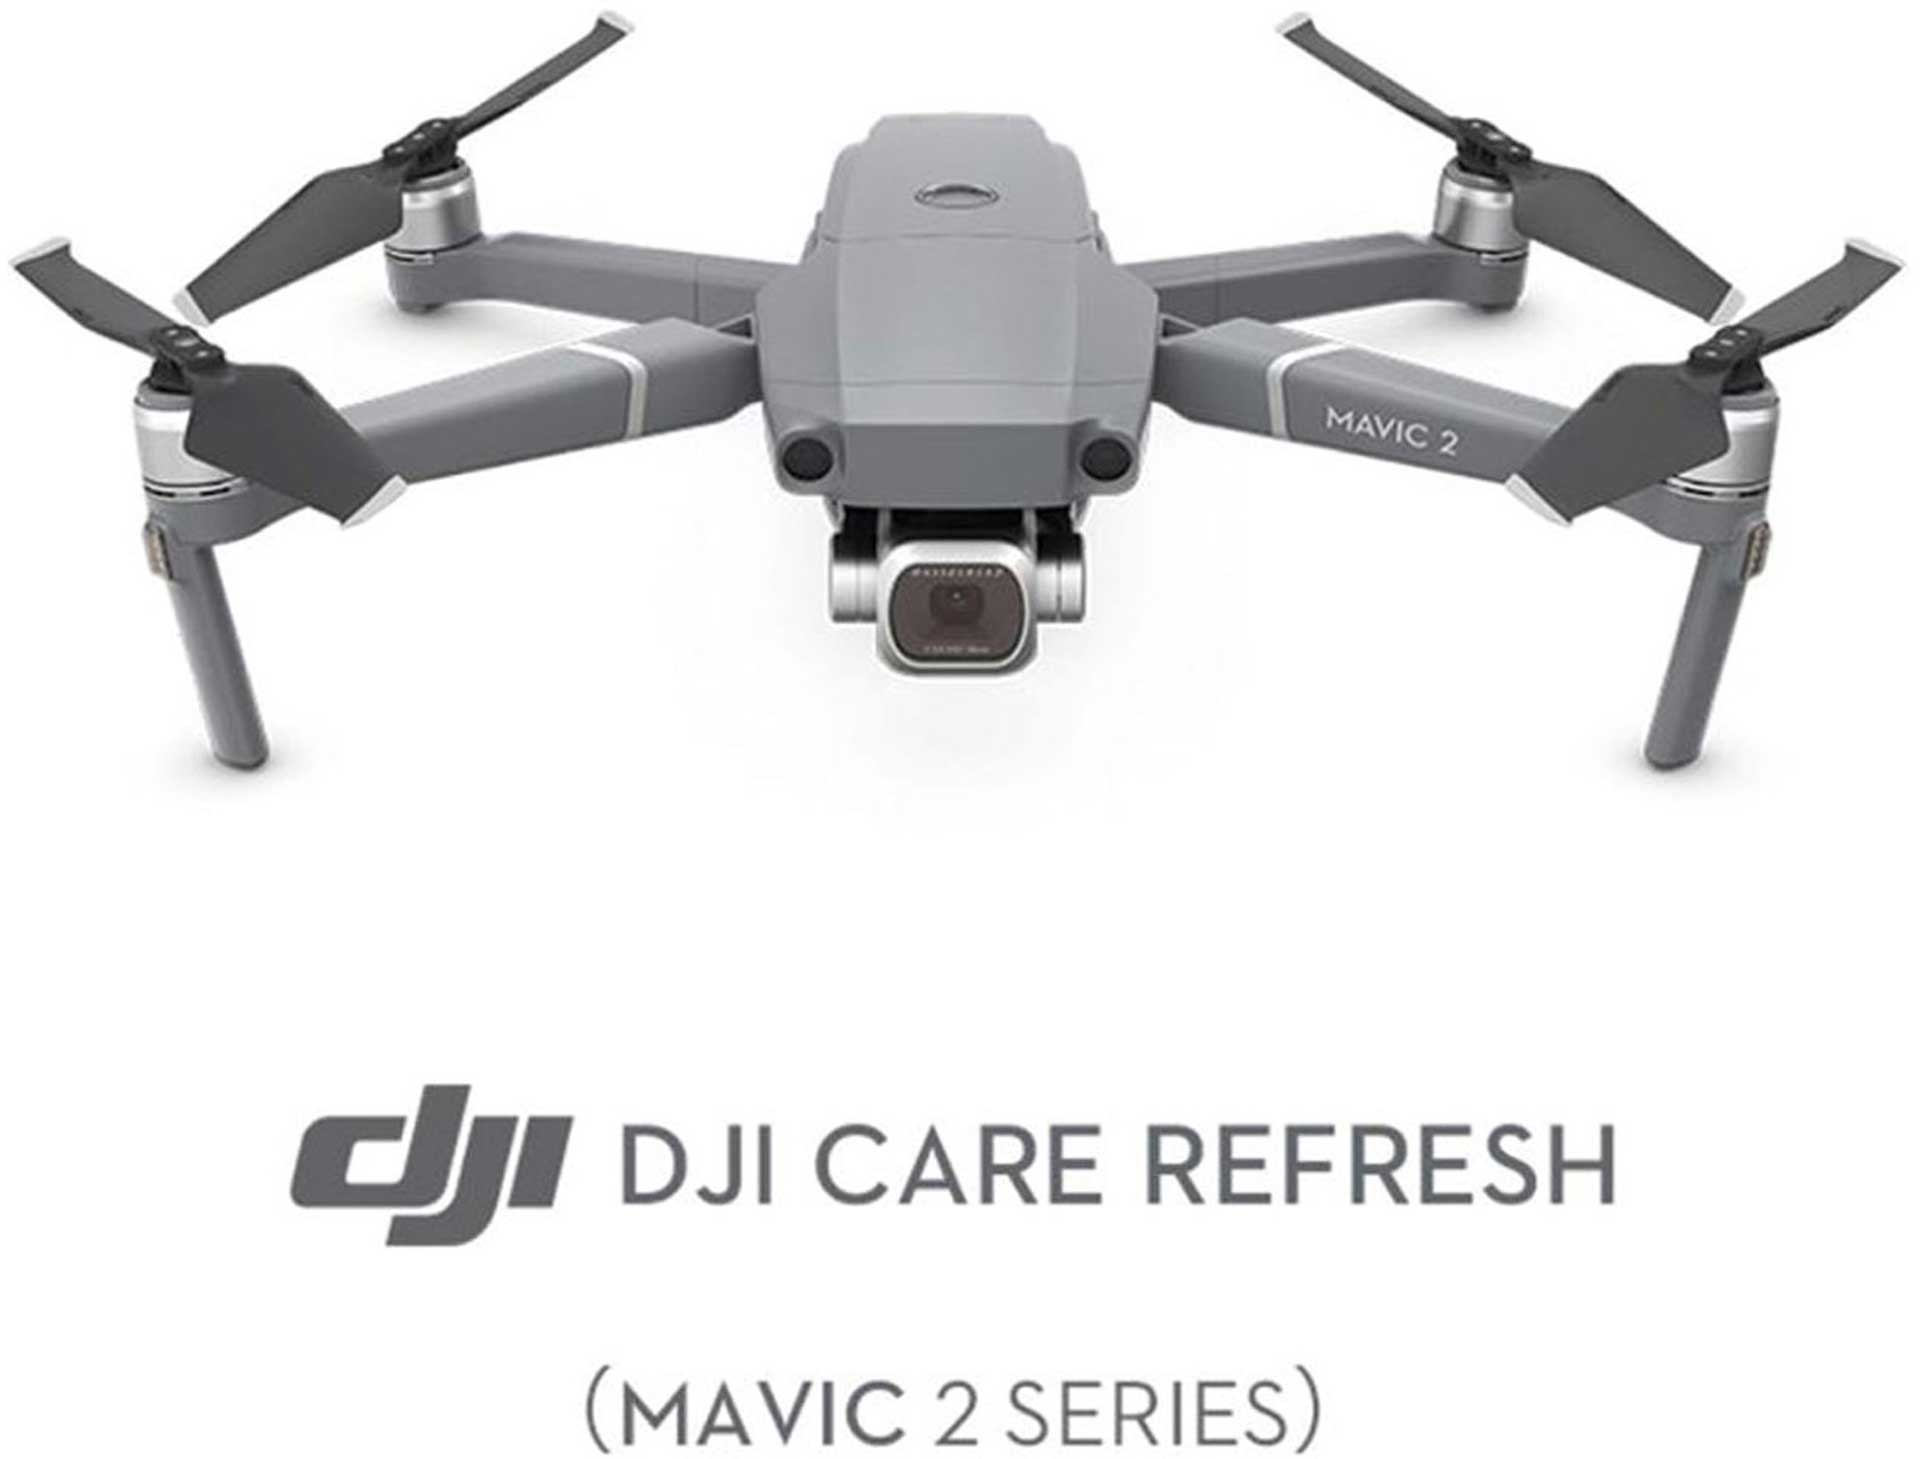 DJI CARE REFRESH (MAVIC 2) ACTIVATION CODE FOR 12 MONTHS.